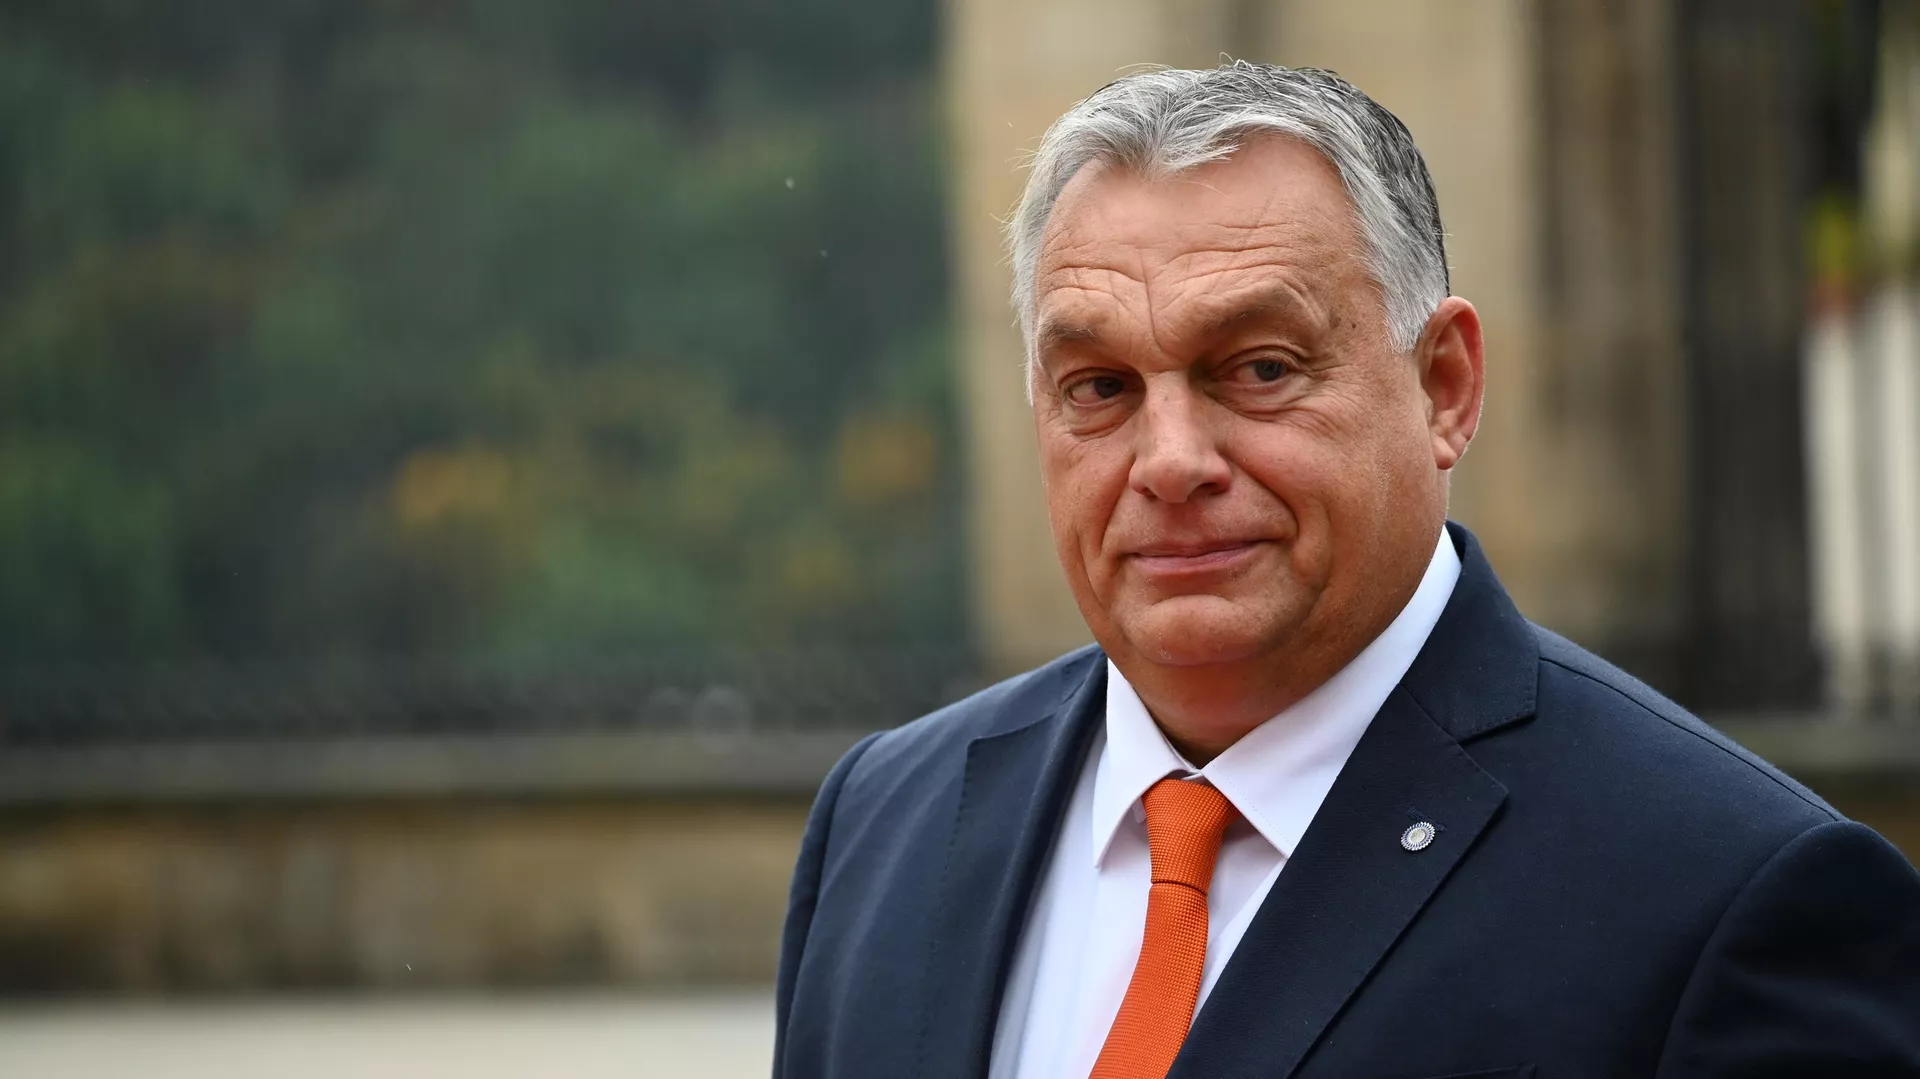 Orban Slams Brussels for Violating Freedom of Speech by Canceling Conservative Conference